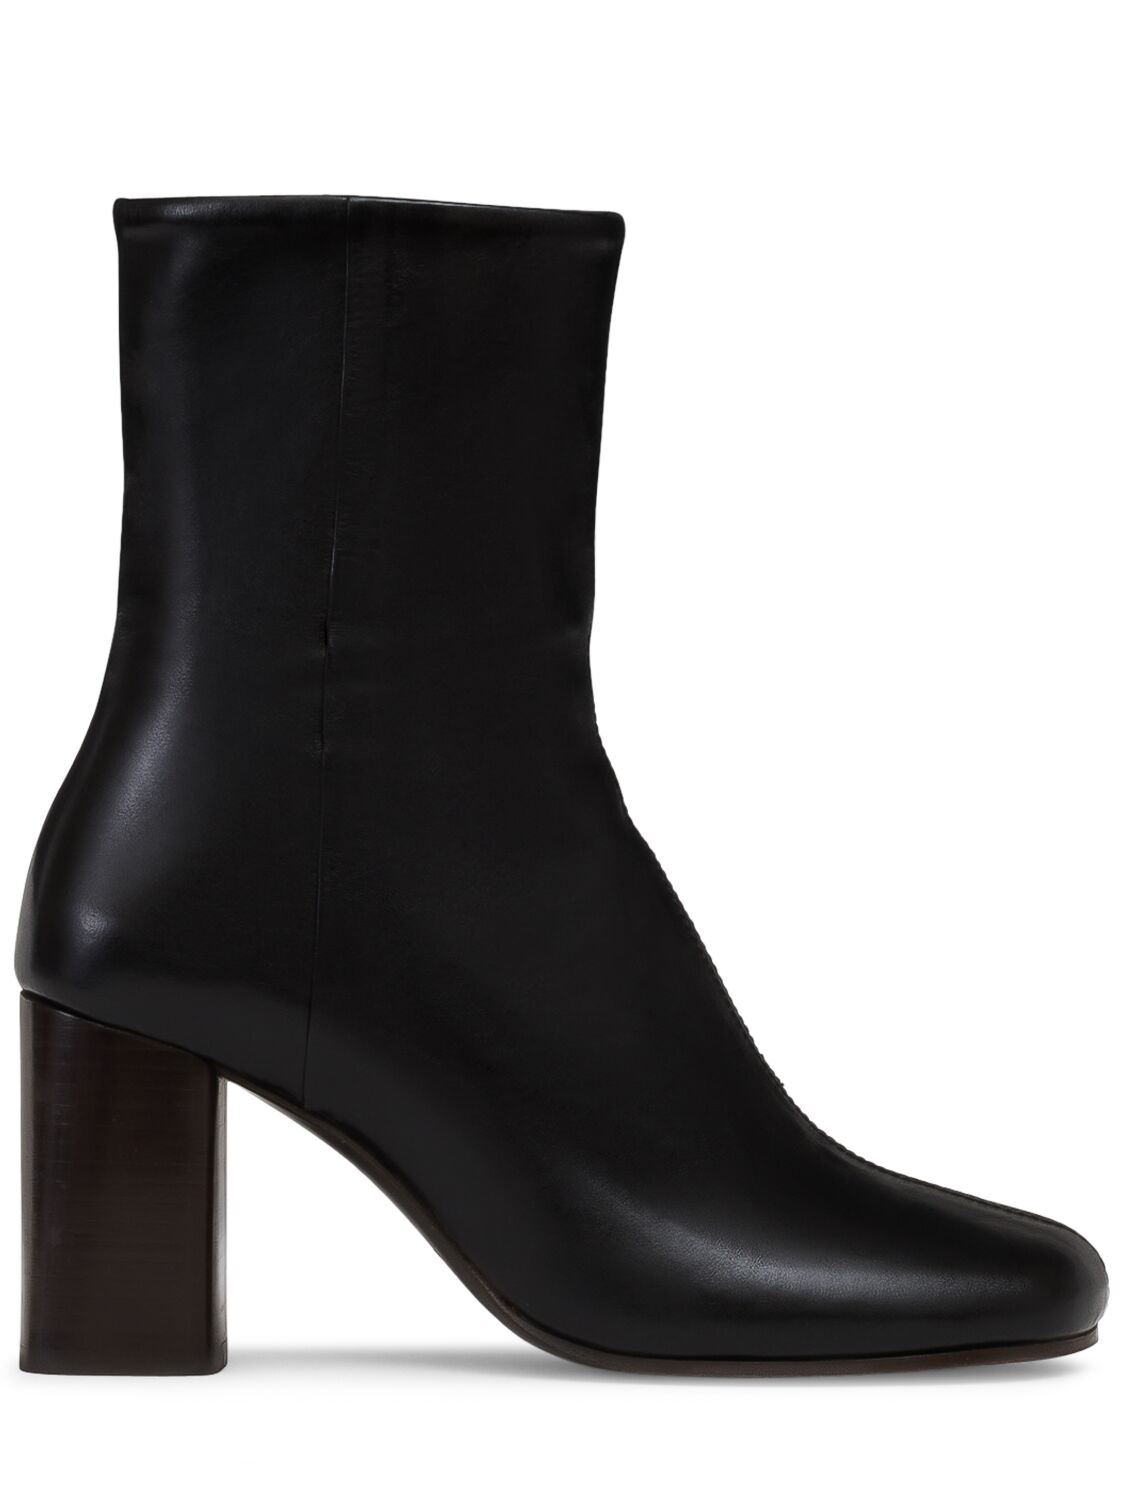 Lemaire 80mm Anatomic Leather Boots In Black